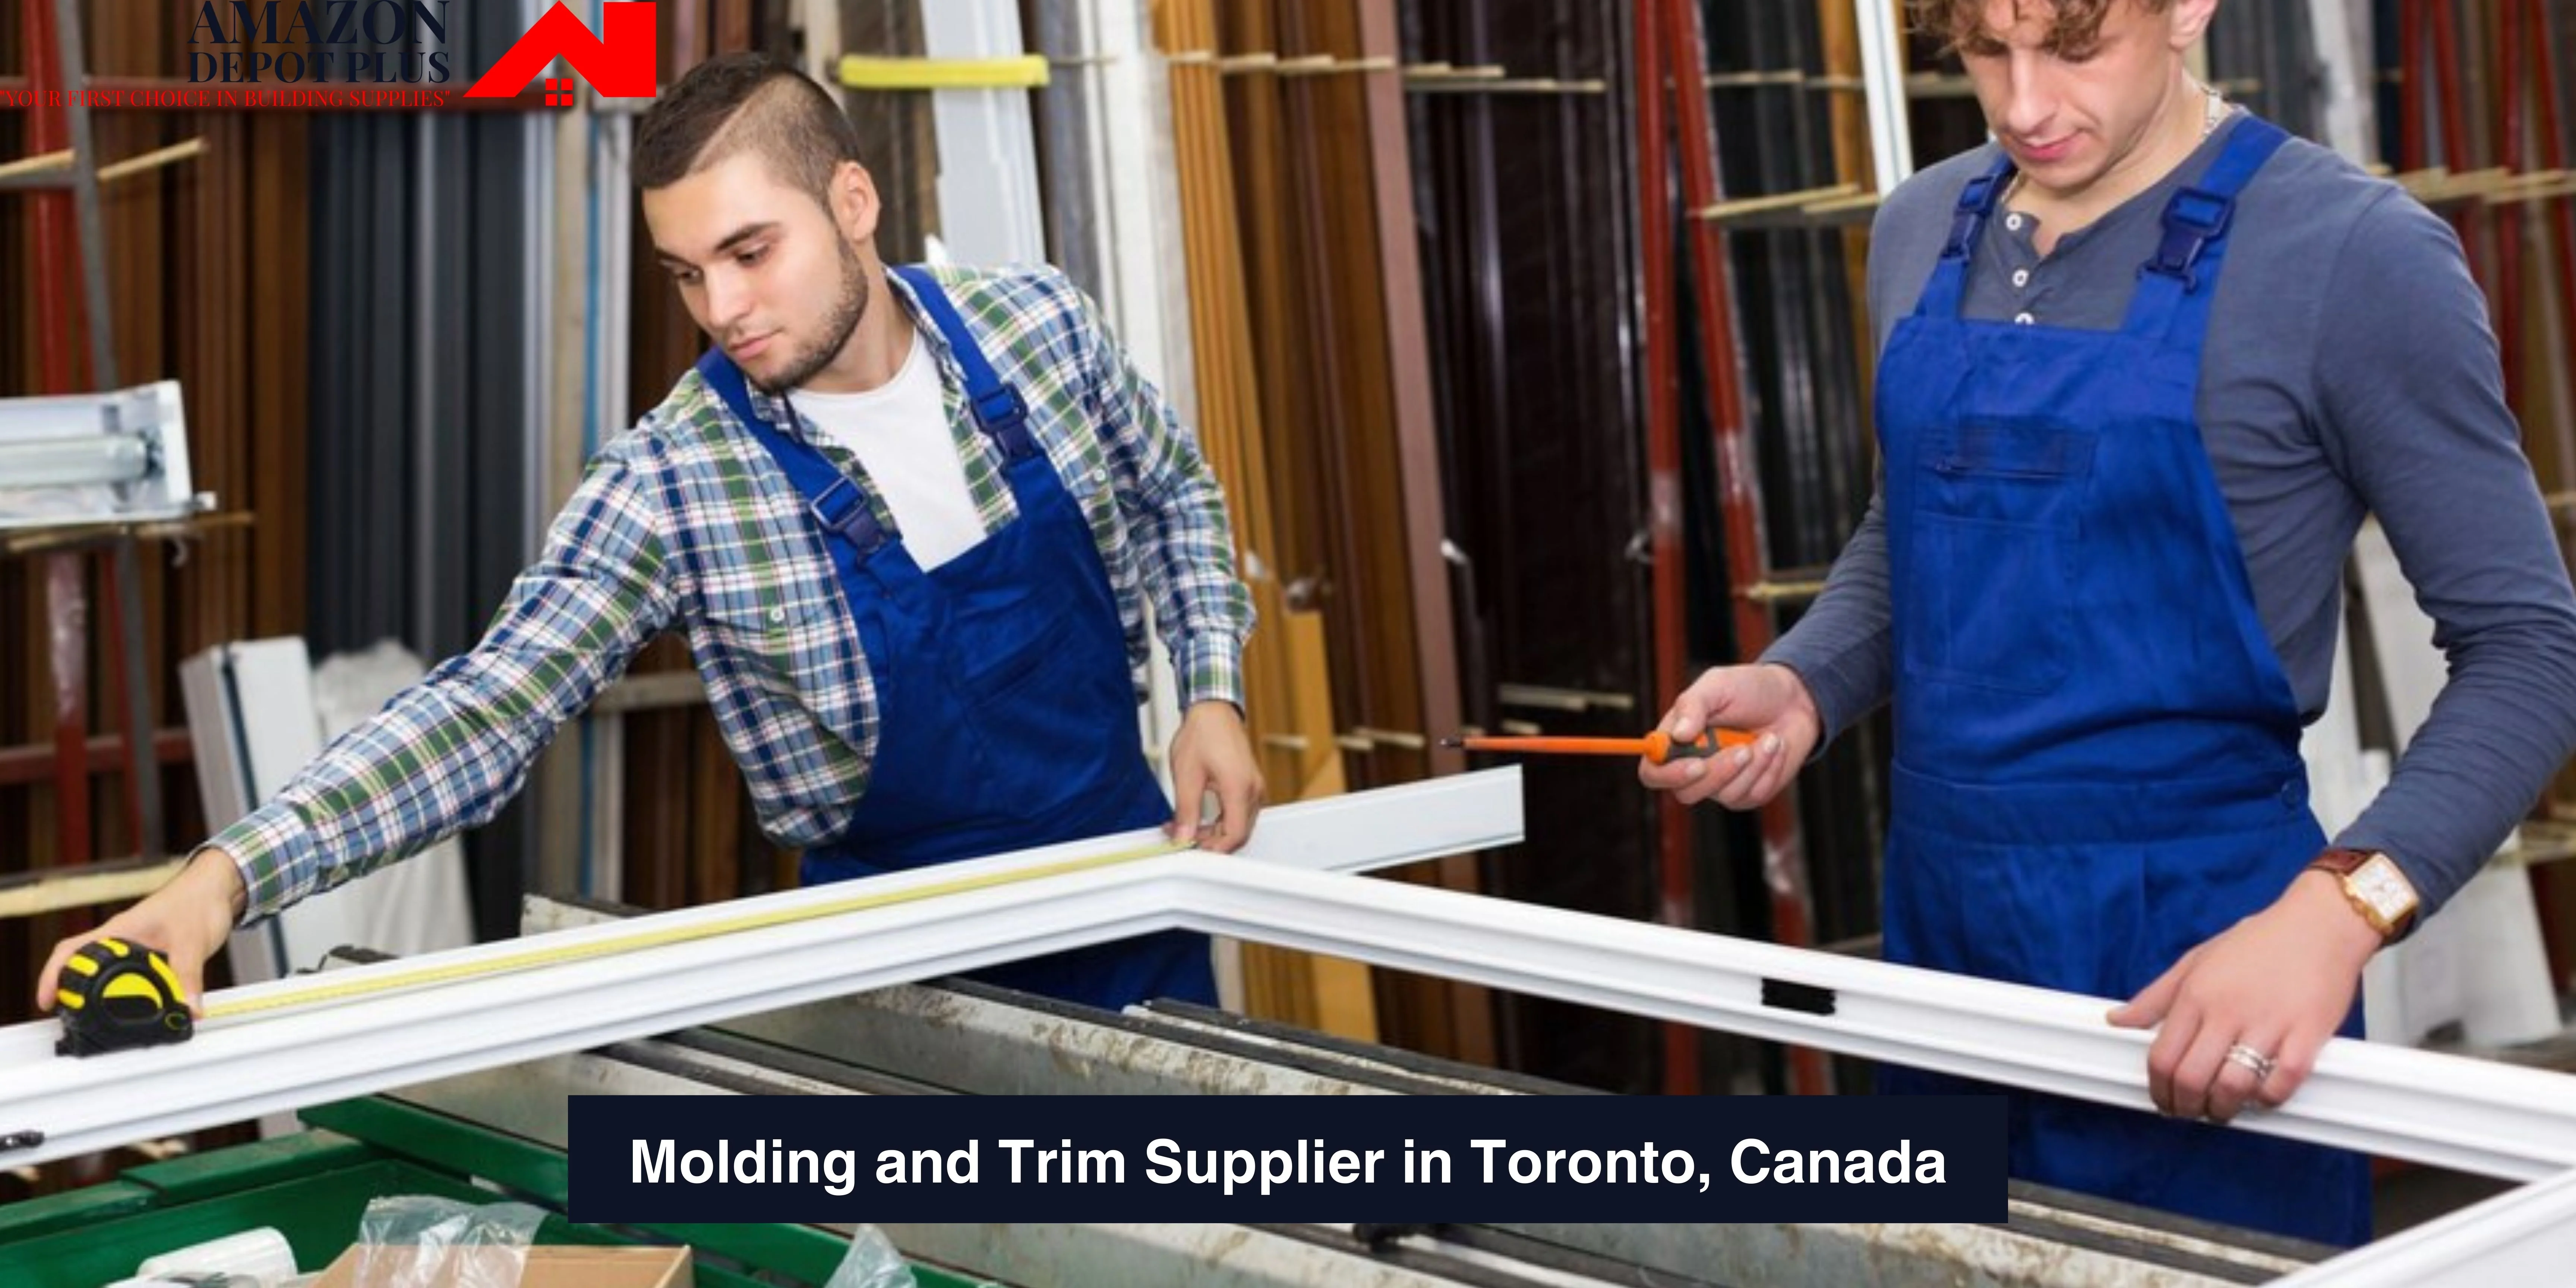 Molding and Trim Supplier in Toronto, Canada